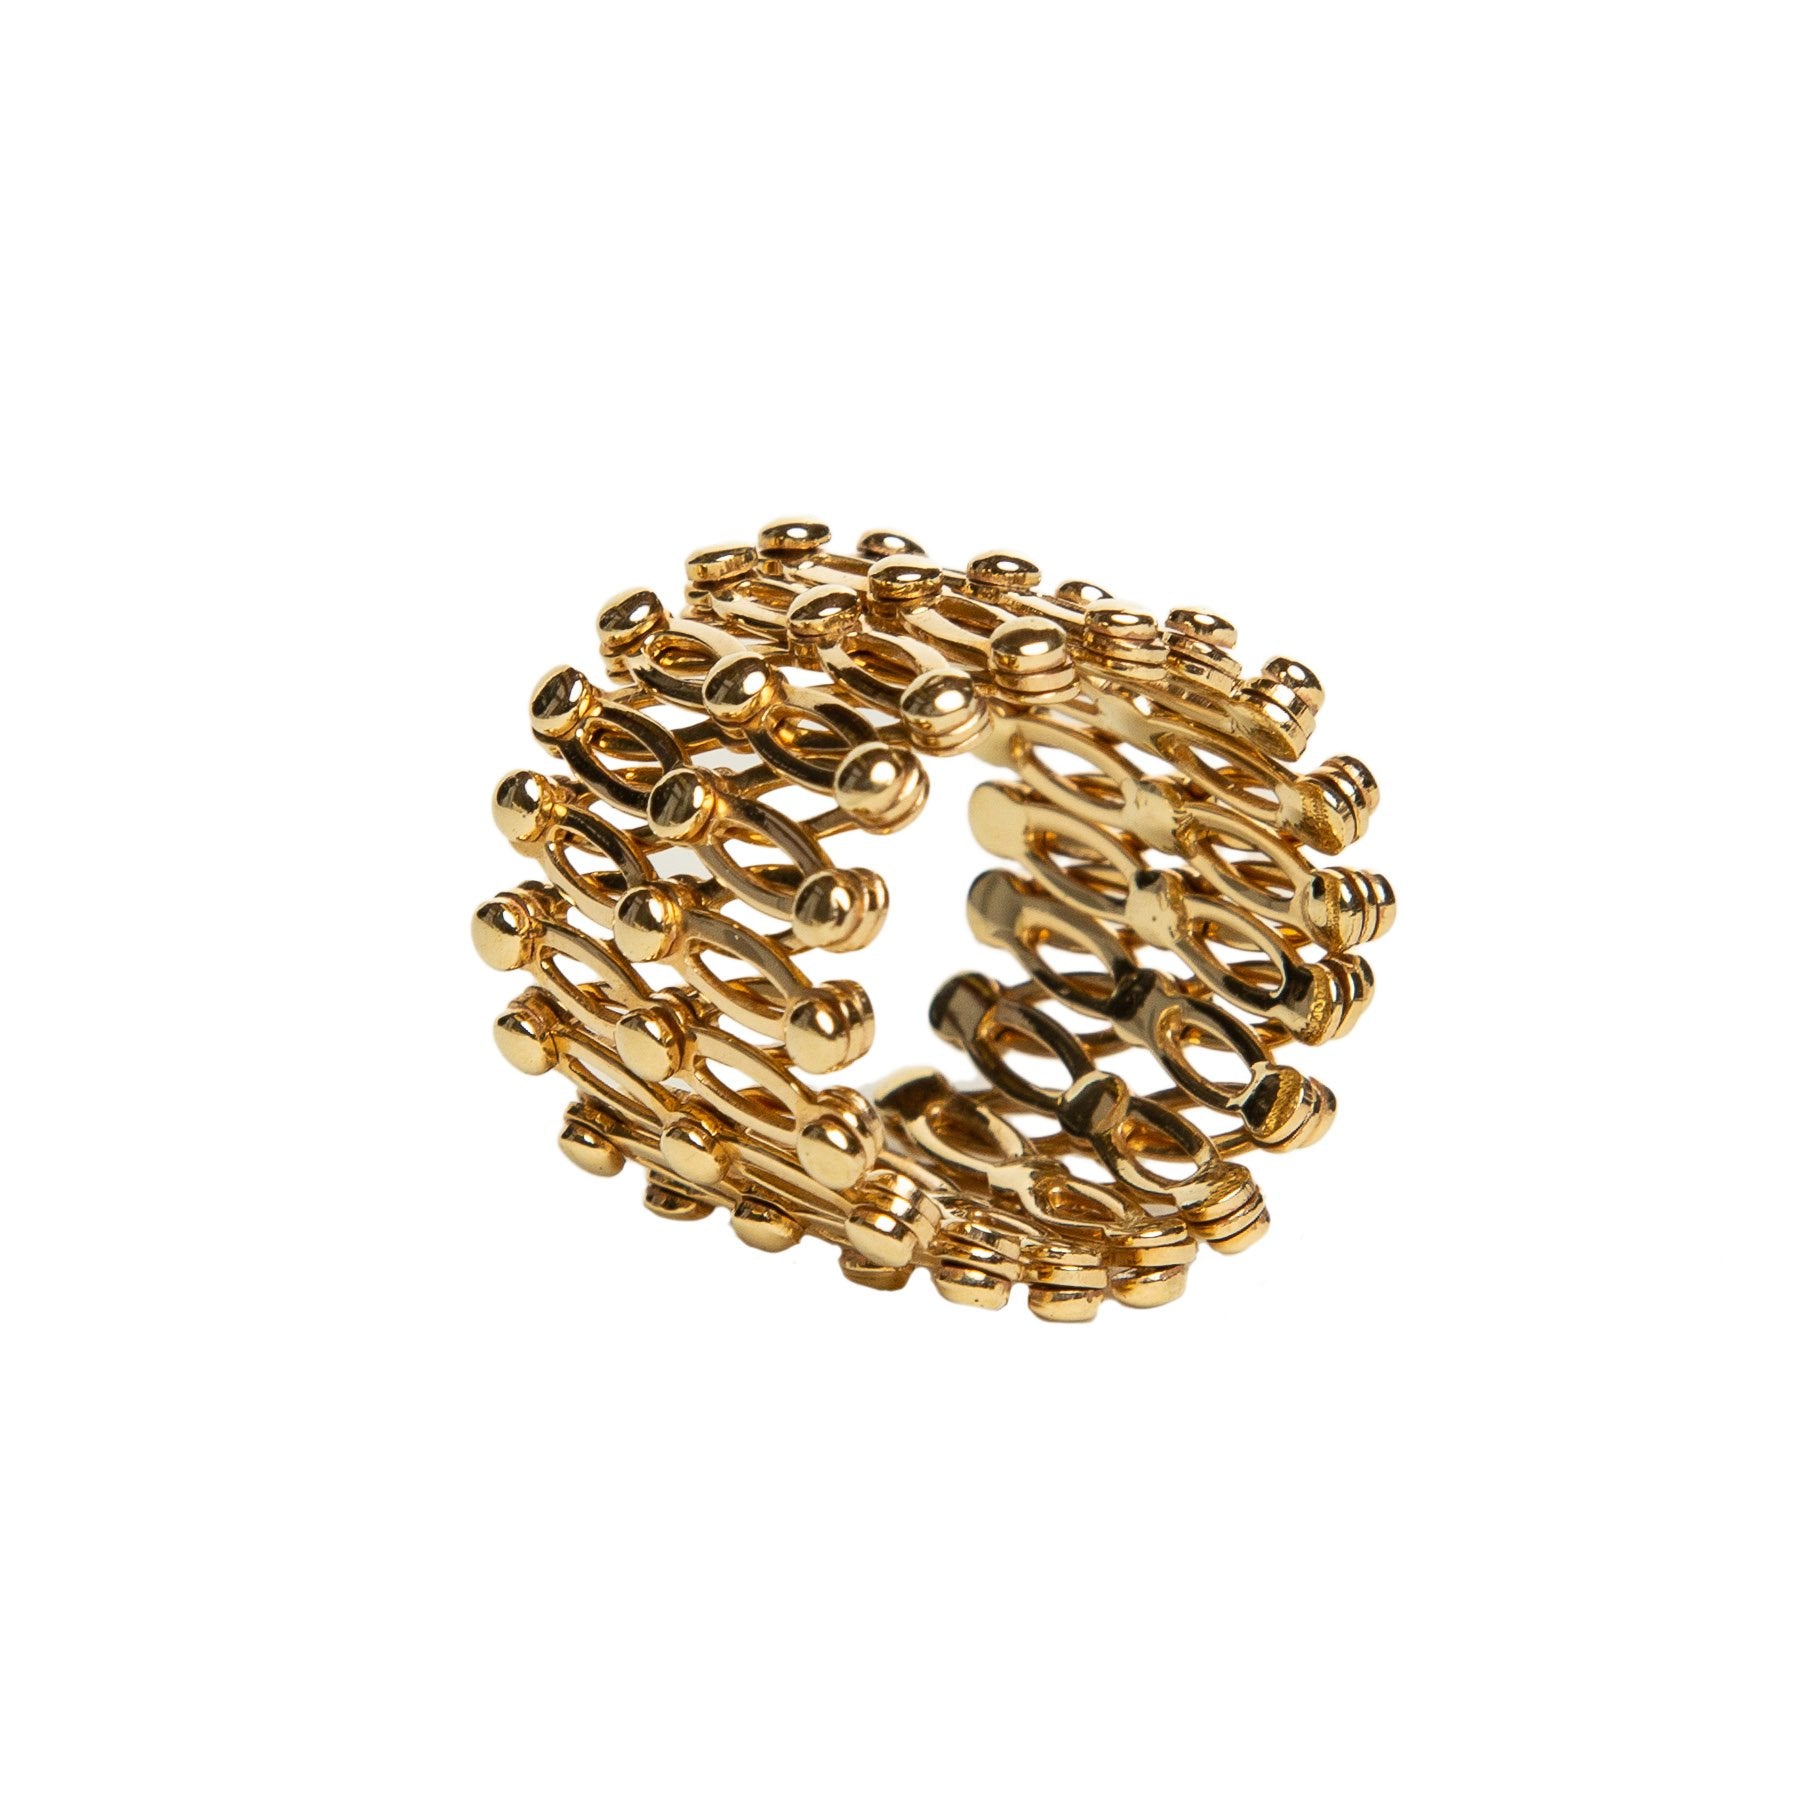 Buy High Trendz Designer Gold Tone Link Chain Adjustable Ring Bracelet  Studded With A Stud For Women And Girls Online at Low Prices in India -  Paytmmall.com